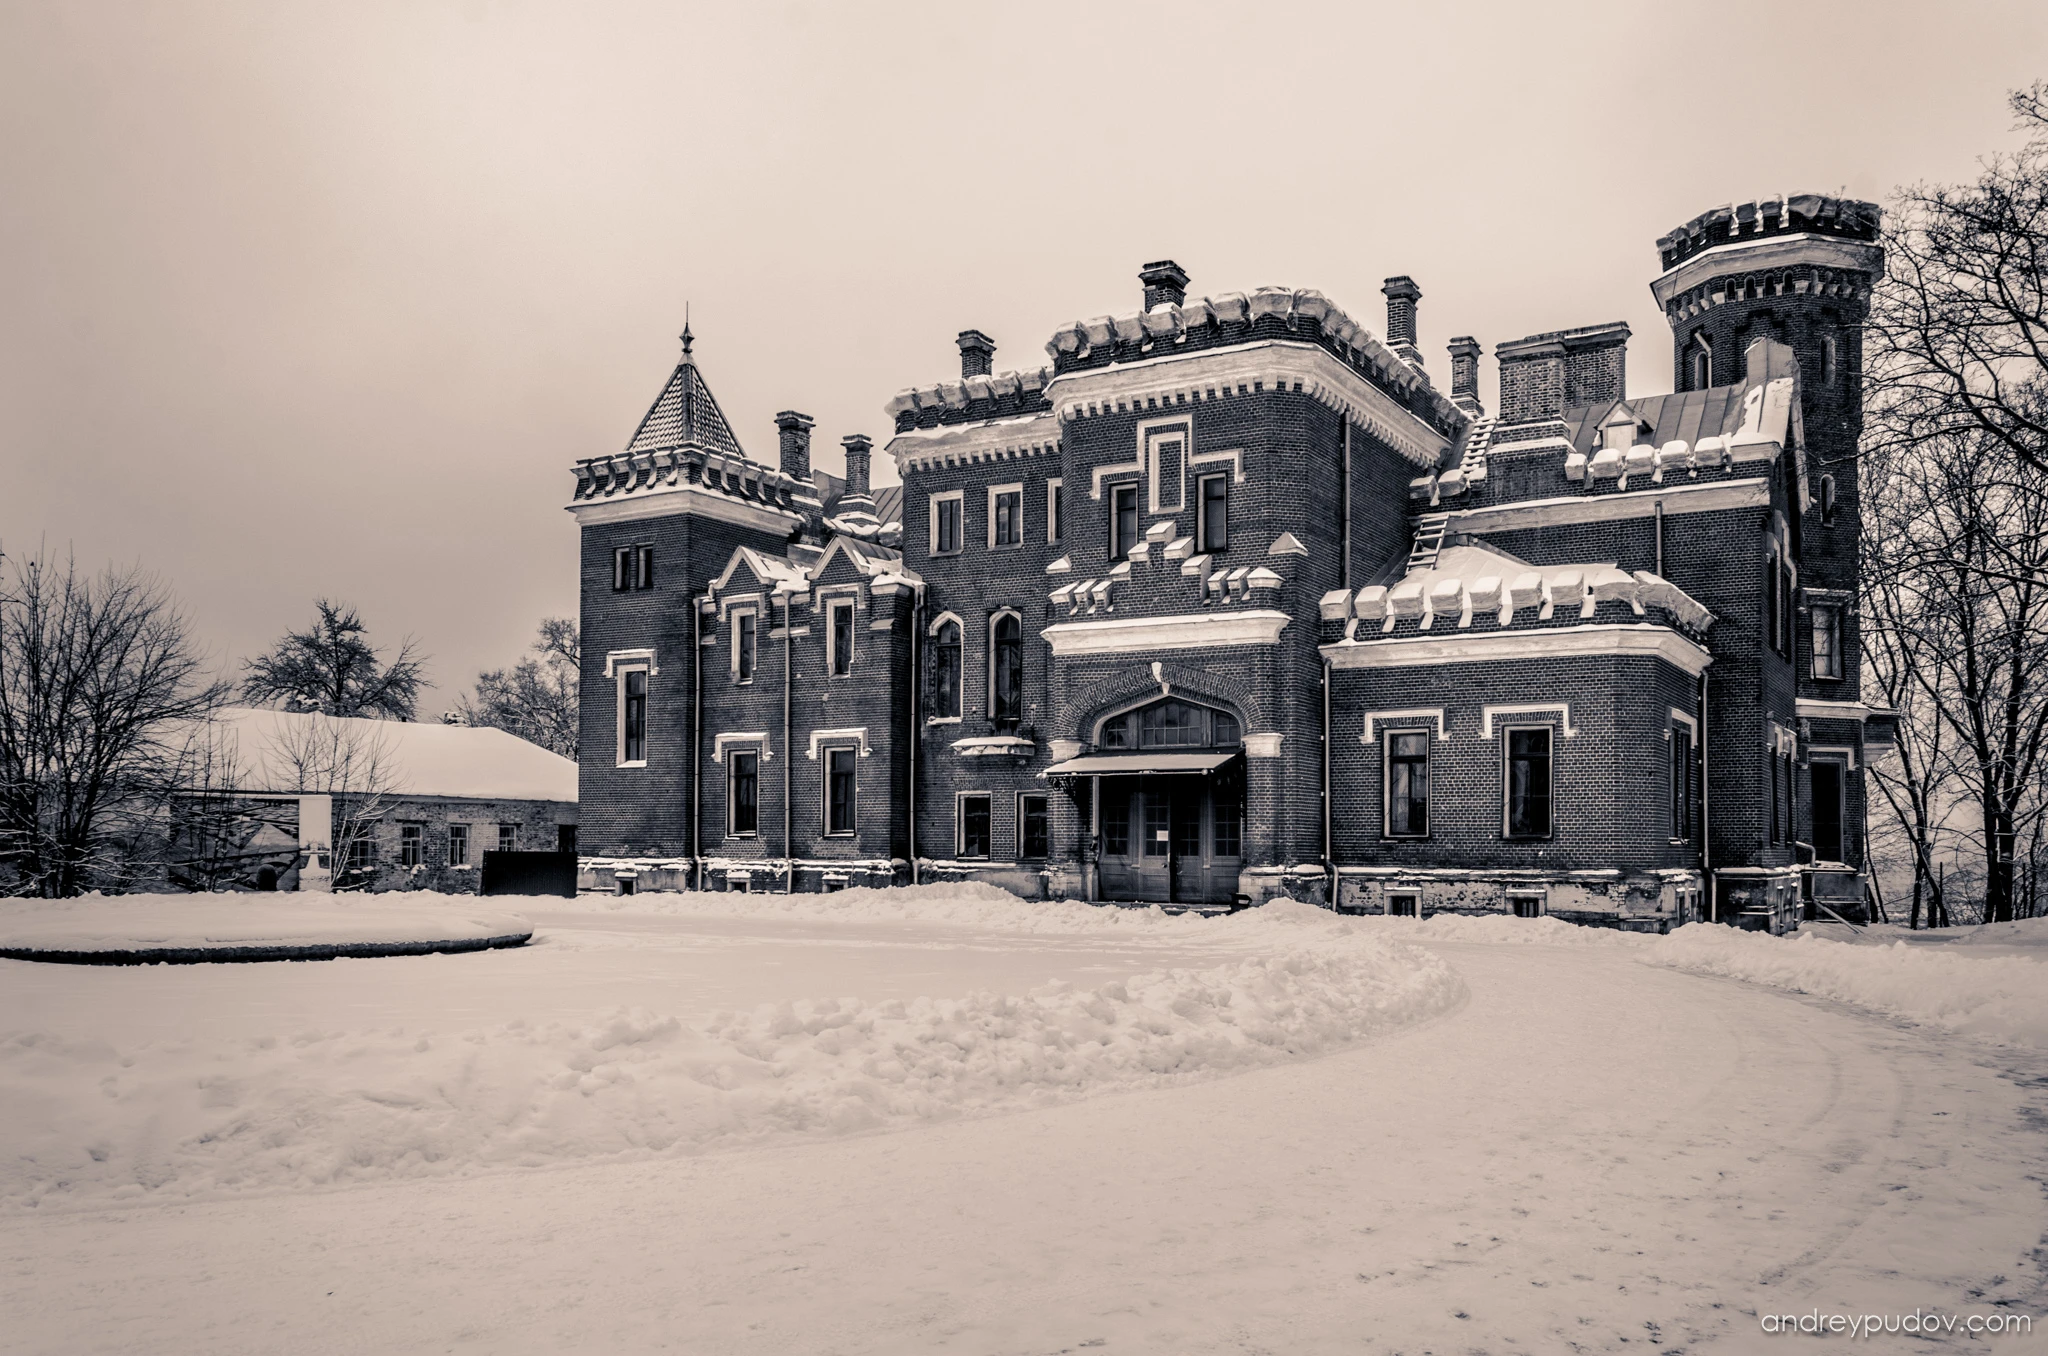 Princess Oldenburg's Palace - The palace was completed in 1887. After the marriage of Duke Peter Alexandrovich of Oldenburg, the couple's only son, to Grand Duchess Olga Alexandrovna, the young couple lived at the palace and then built their own home, Olgino, next to it.